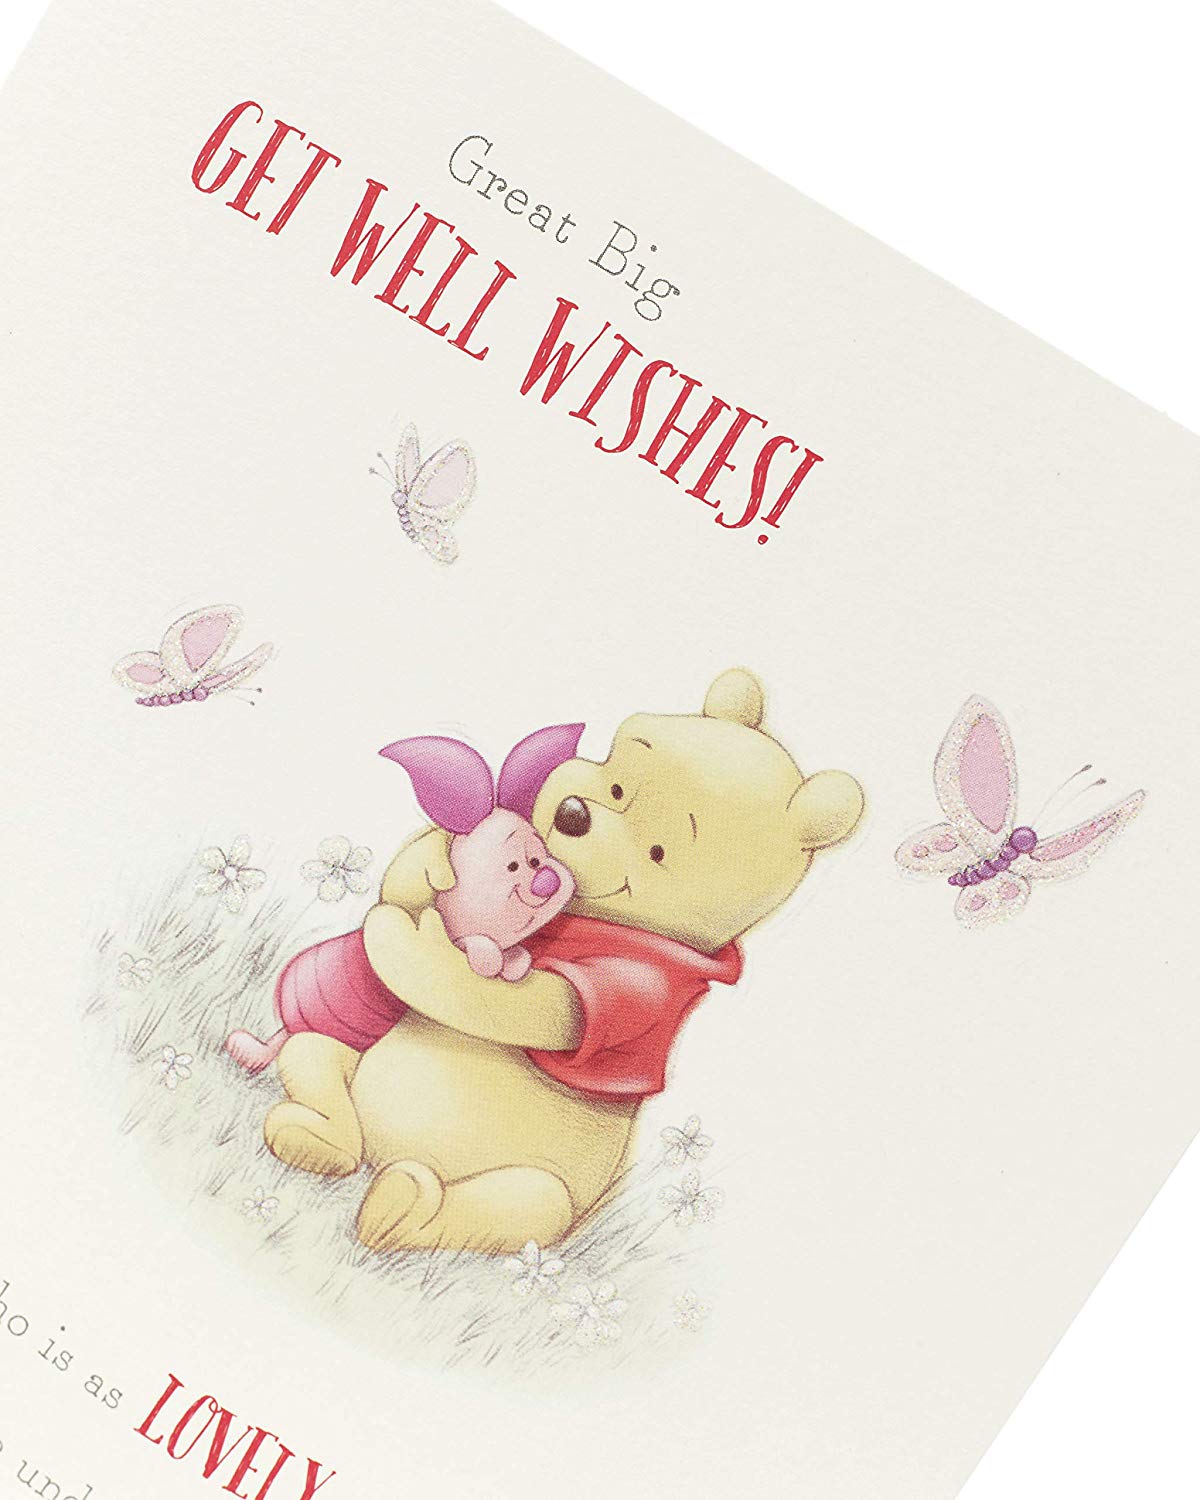 Get Well Soon Cute Teddy With Flower Of Bunch Greetings Card – Evercarts